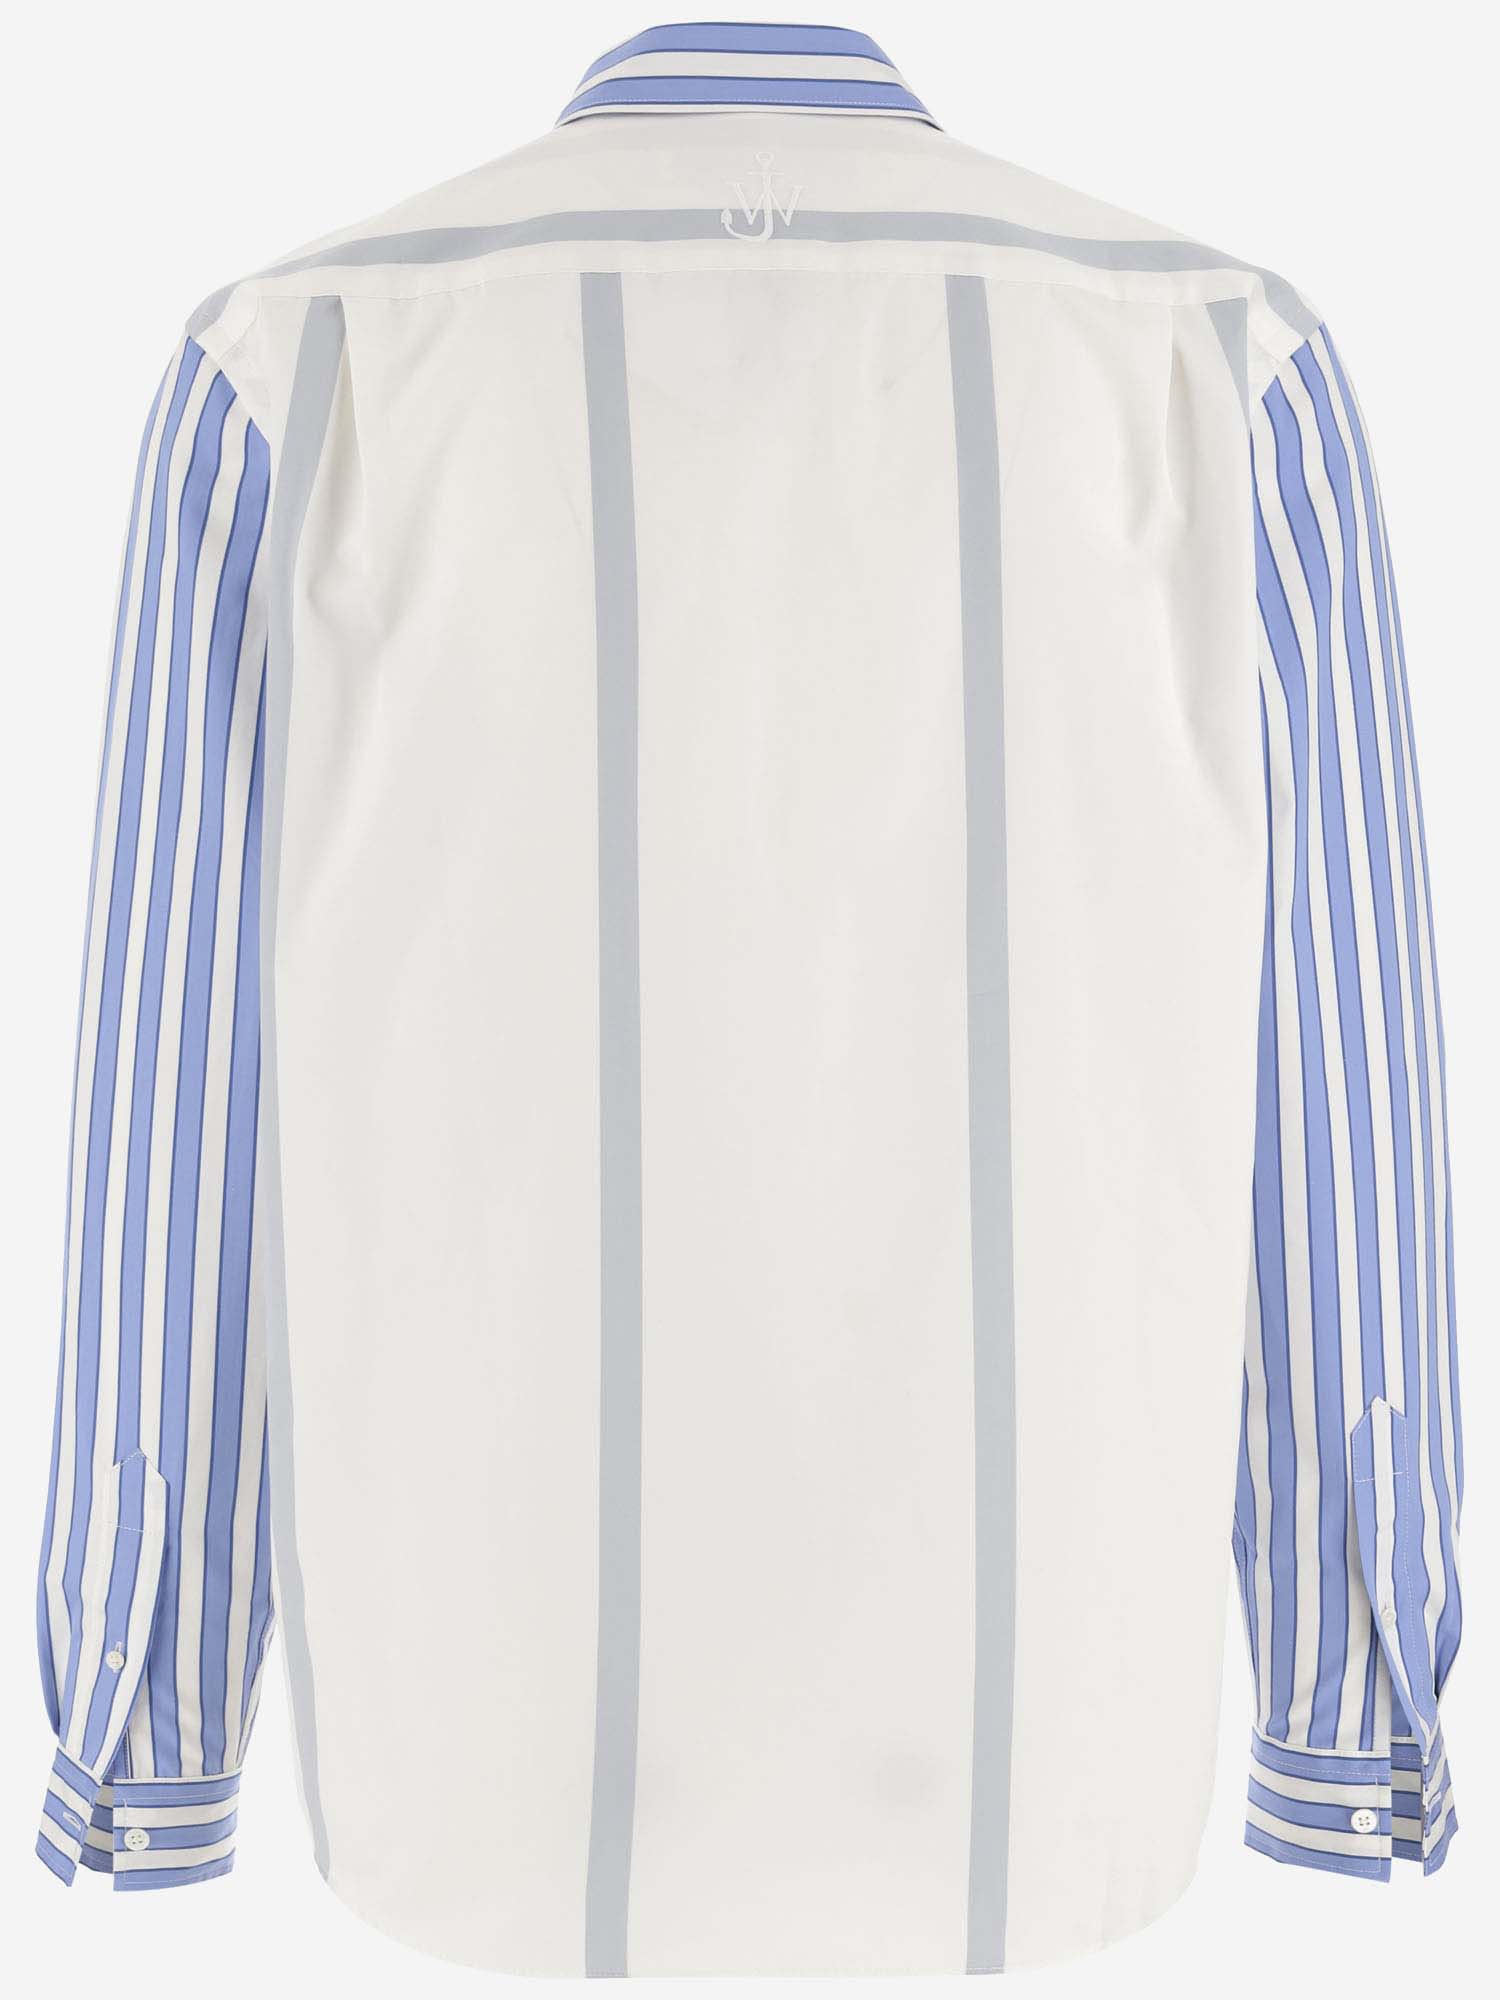 Shop Jw Anderson Striped Cotton Shirt In Blue